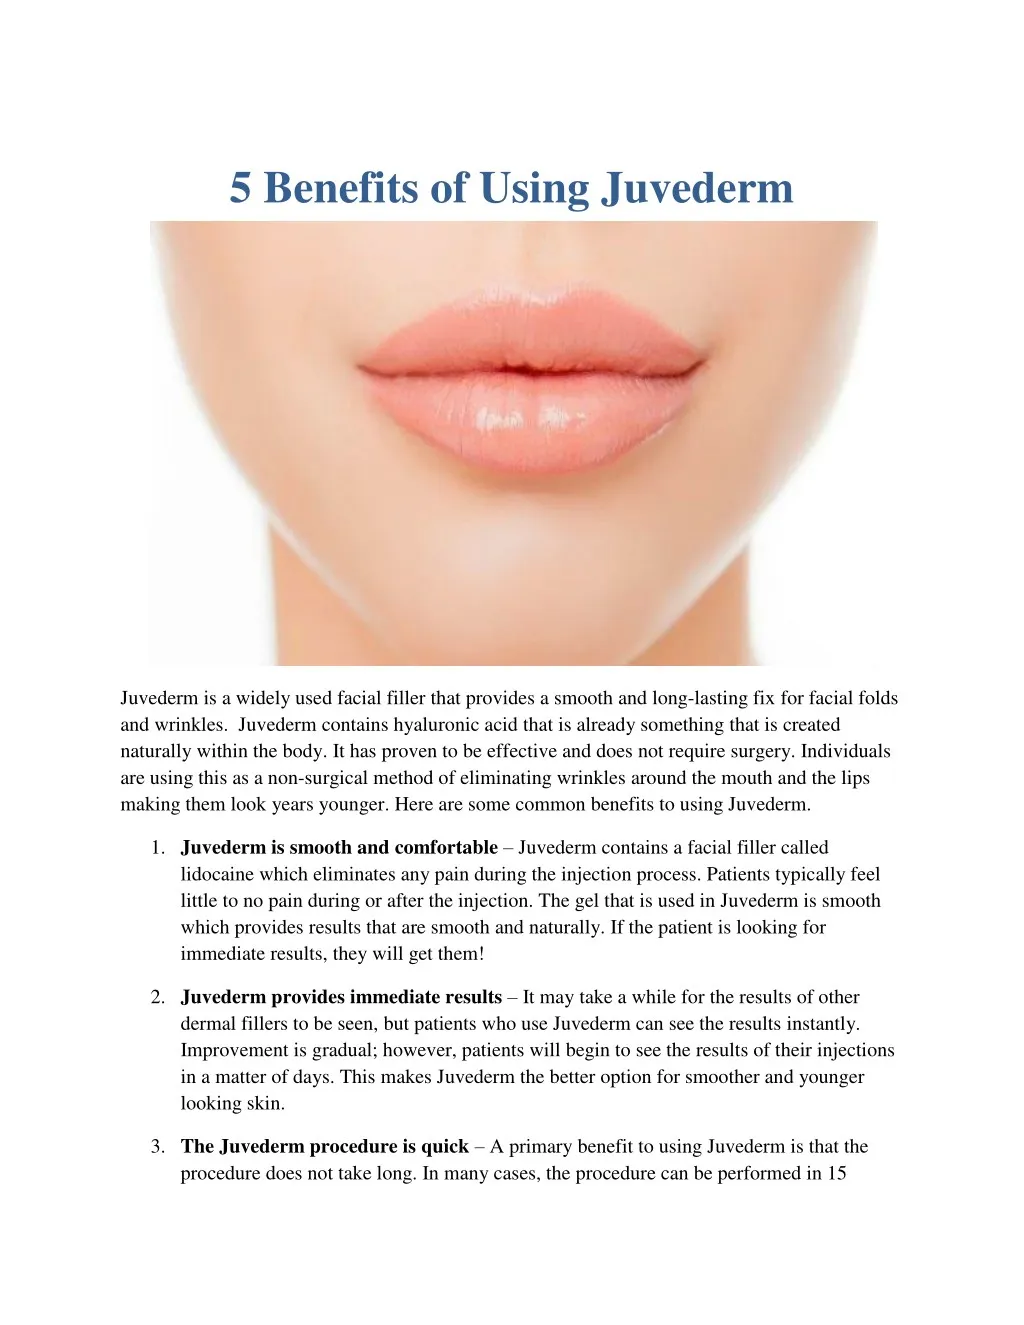 5 benefits of using juvederm